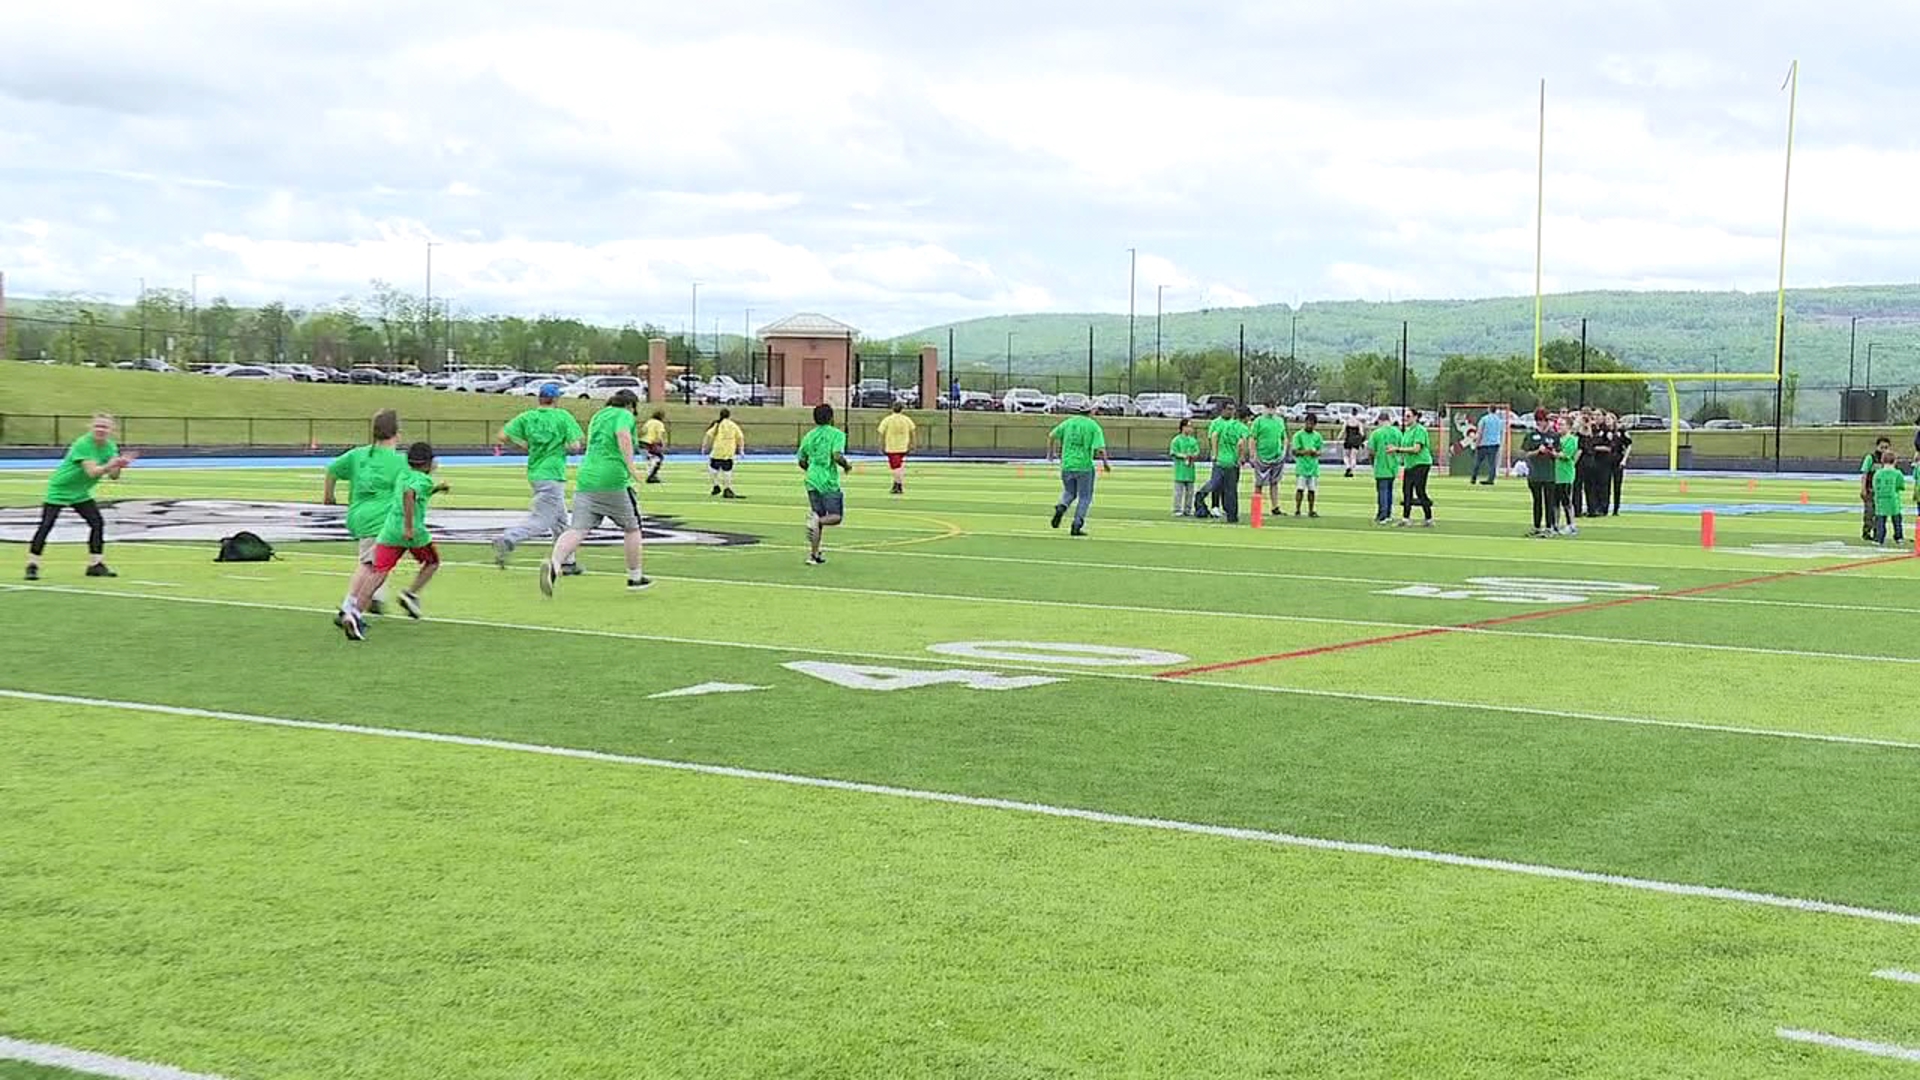 Students took part in the 17th annual field day at the Wilkes-Barre Area High School field on Thursday.